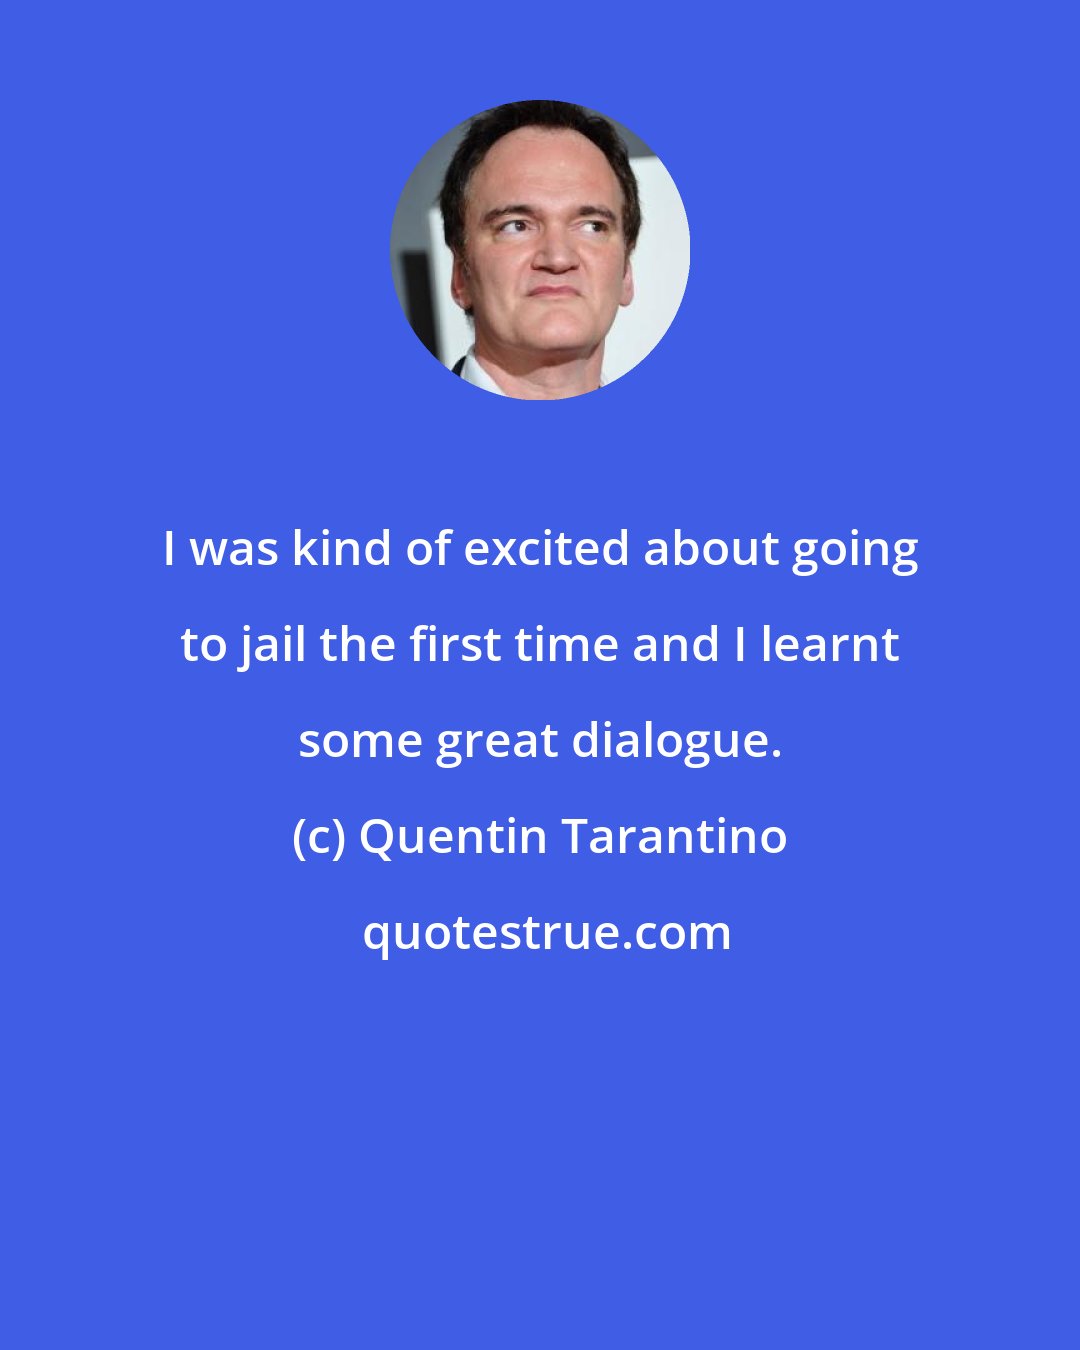 Quentin Tarantino: I was kind of excited about going to jail the first time and I learnt some great dialogue.